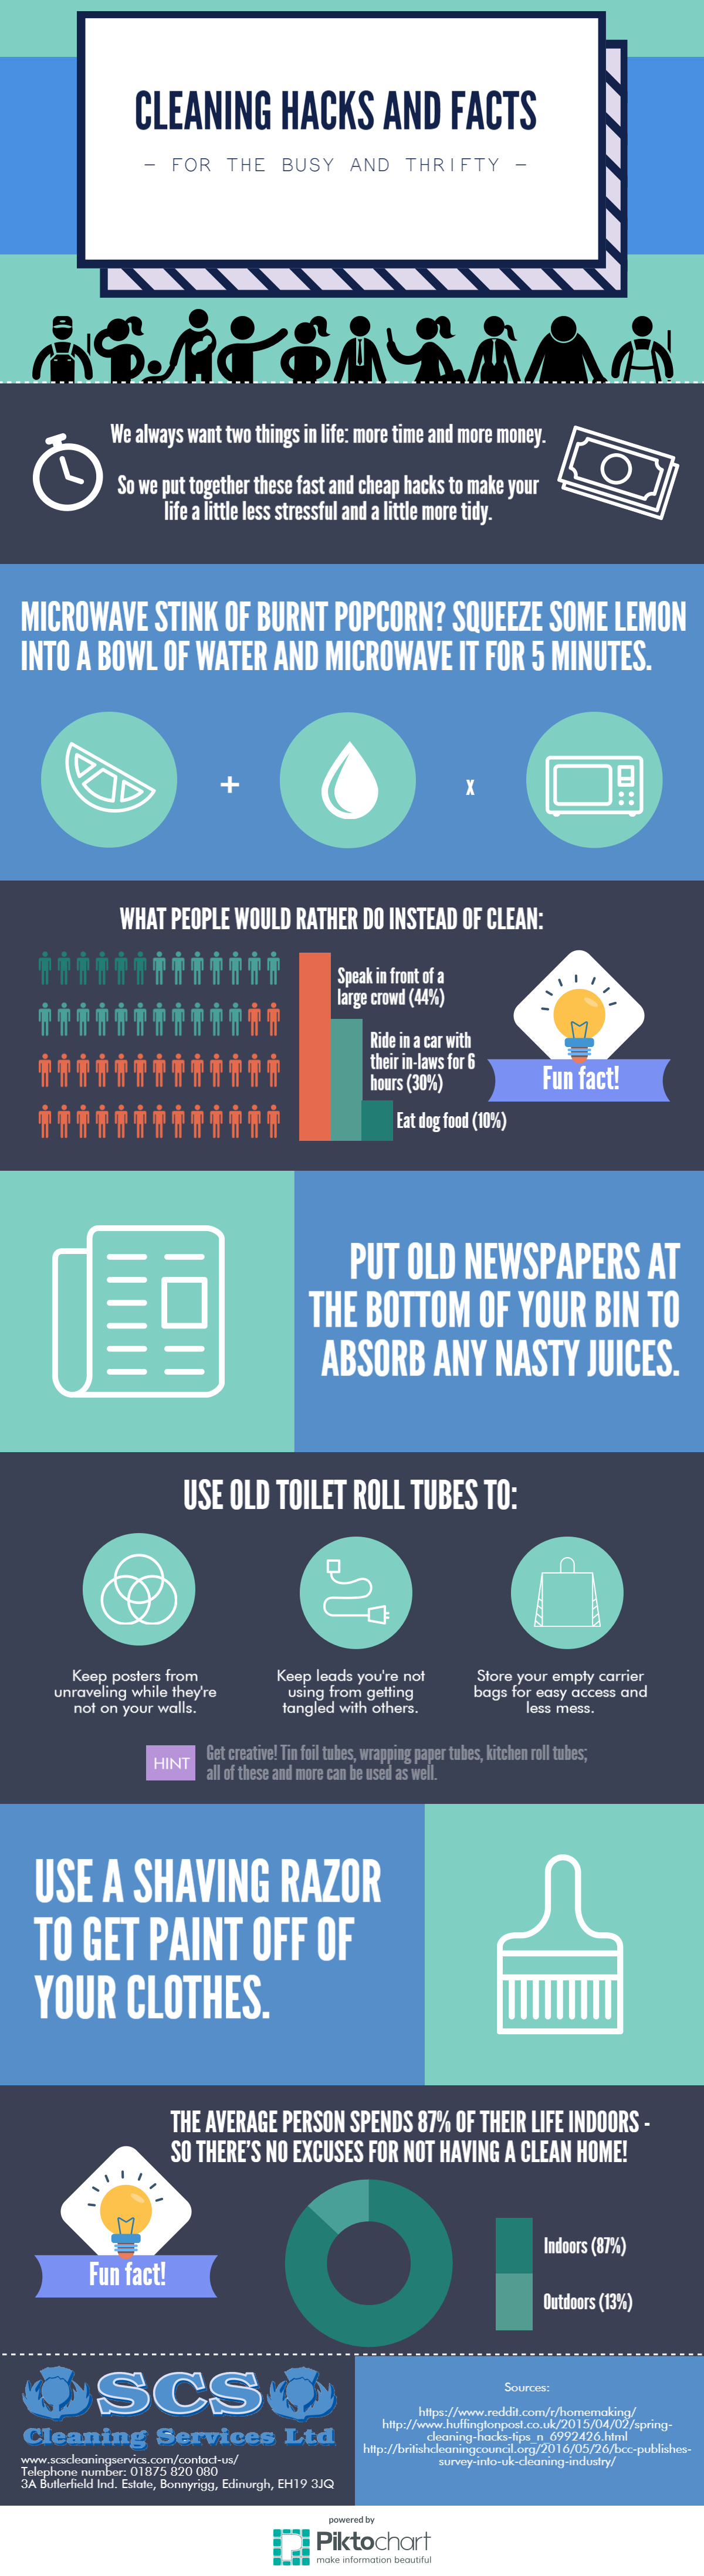 An inforgraphic for SCS Cleaning Services called "Cleaning Hacks and Facts For the Busy and Thrifty"